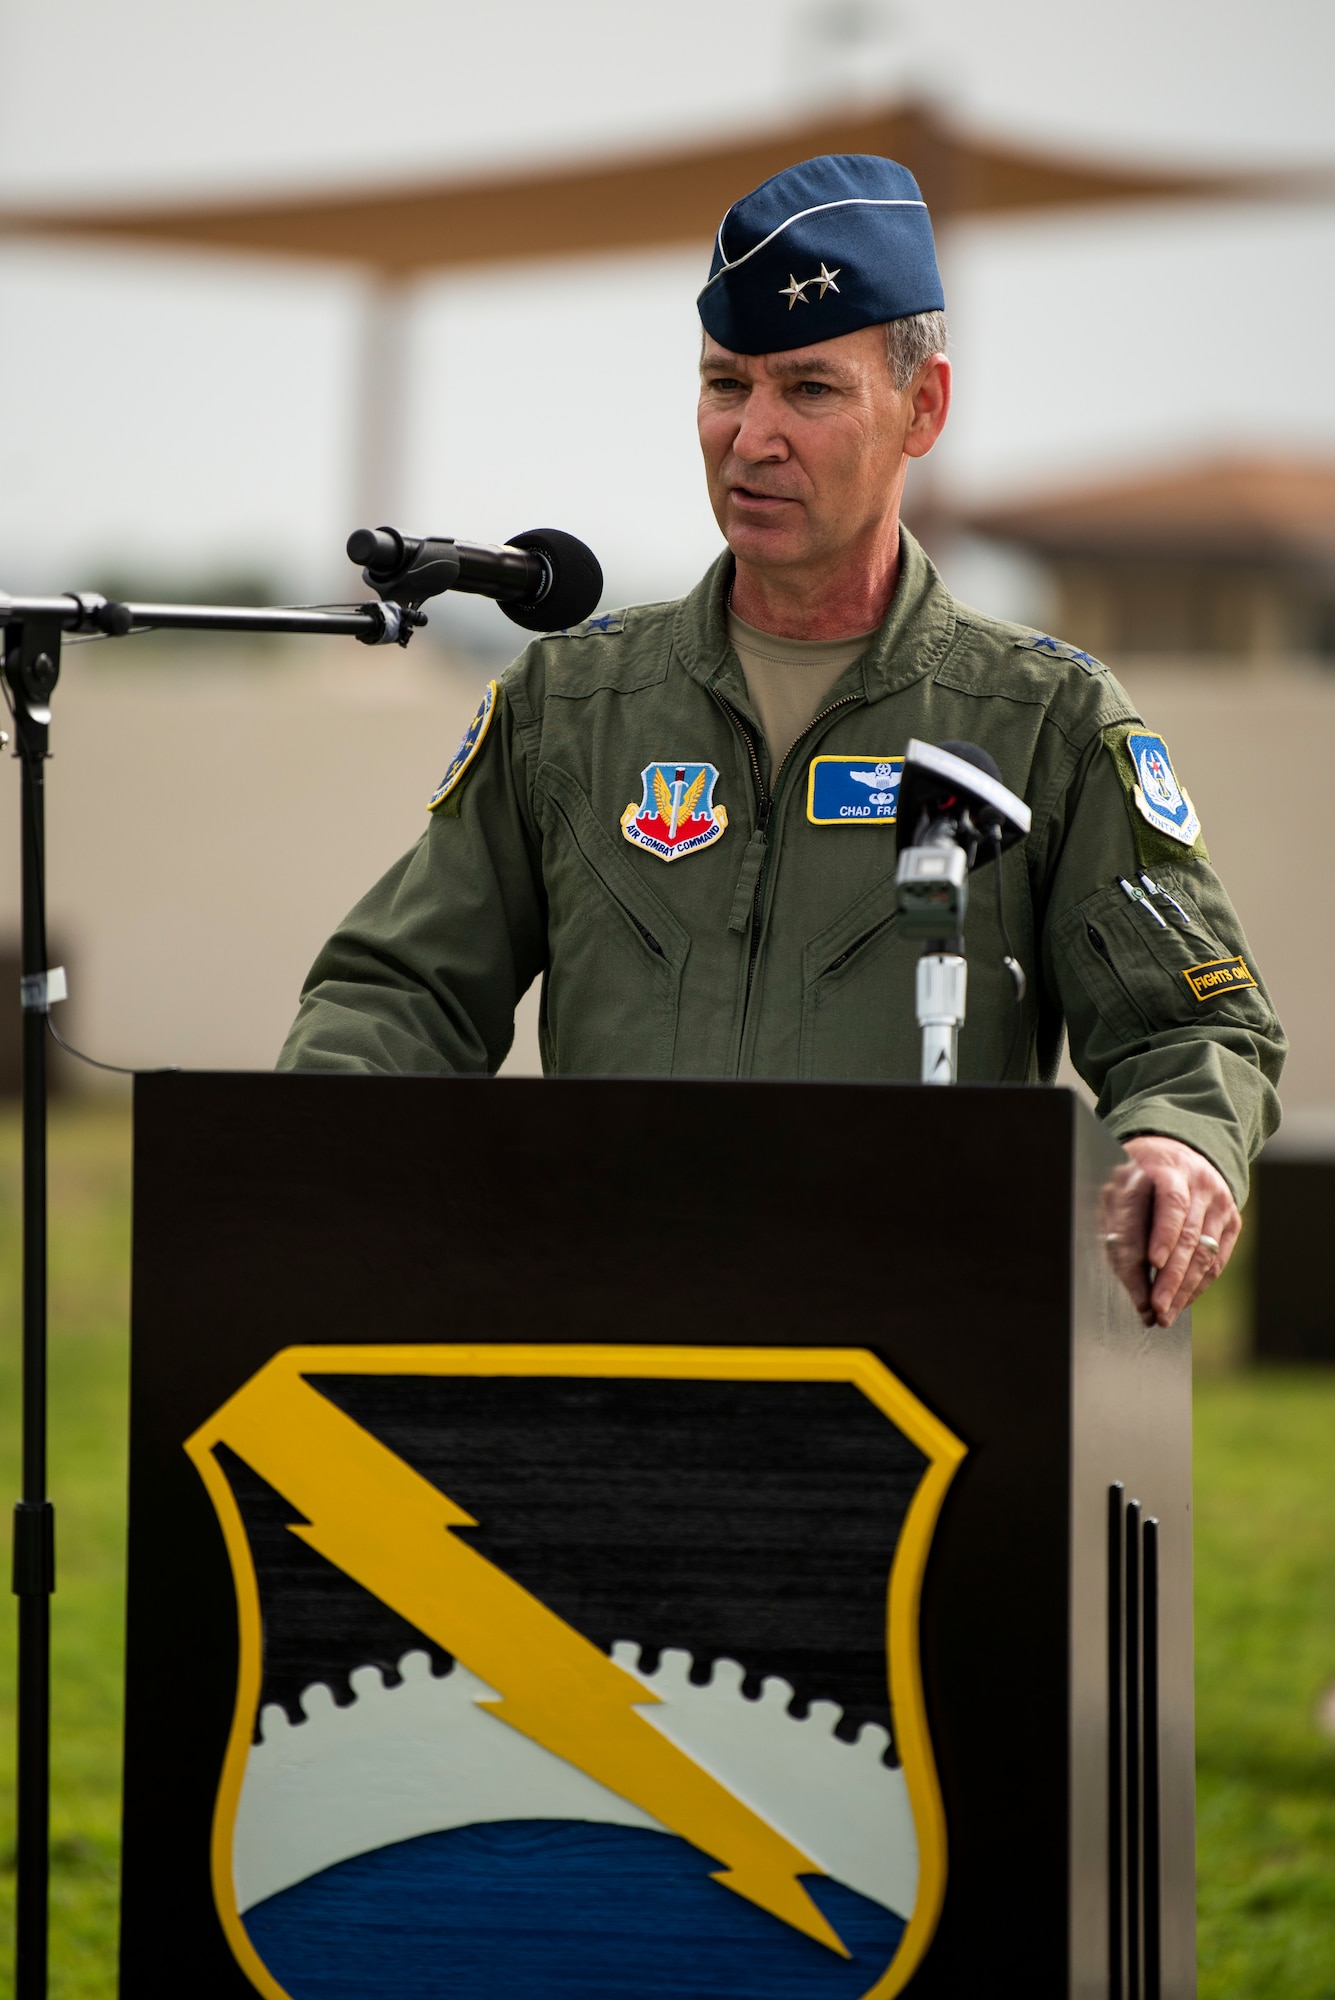 U.S. Air Force Maj. Gen. Chad Franks, Ninth Air Force commander, speaks during a change of command ceremony at Tyndall Air Force Base, Florida, June 26, 2020. Franks highlighted the wing’s accomplishments under U.S. Air Force Col. Brian Laidlaw and expressed his confidence in U.S. Air Force Col. Greg Moseley as the new 325th Fighter Wing commander. (U.S. Air Force photo by Tech. Sgt. Clayton Lenhardt)